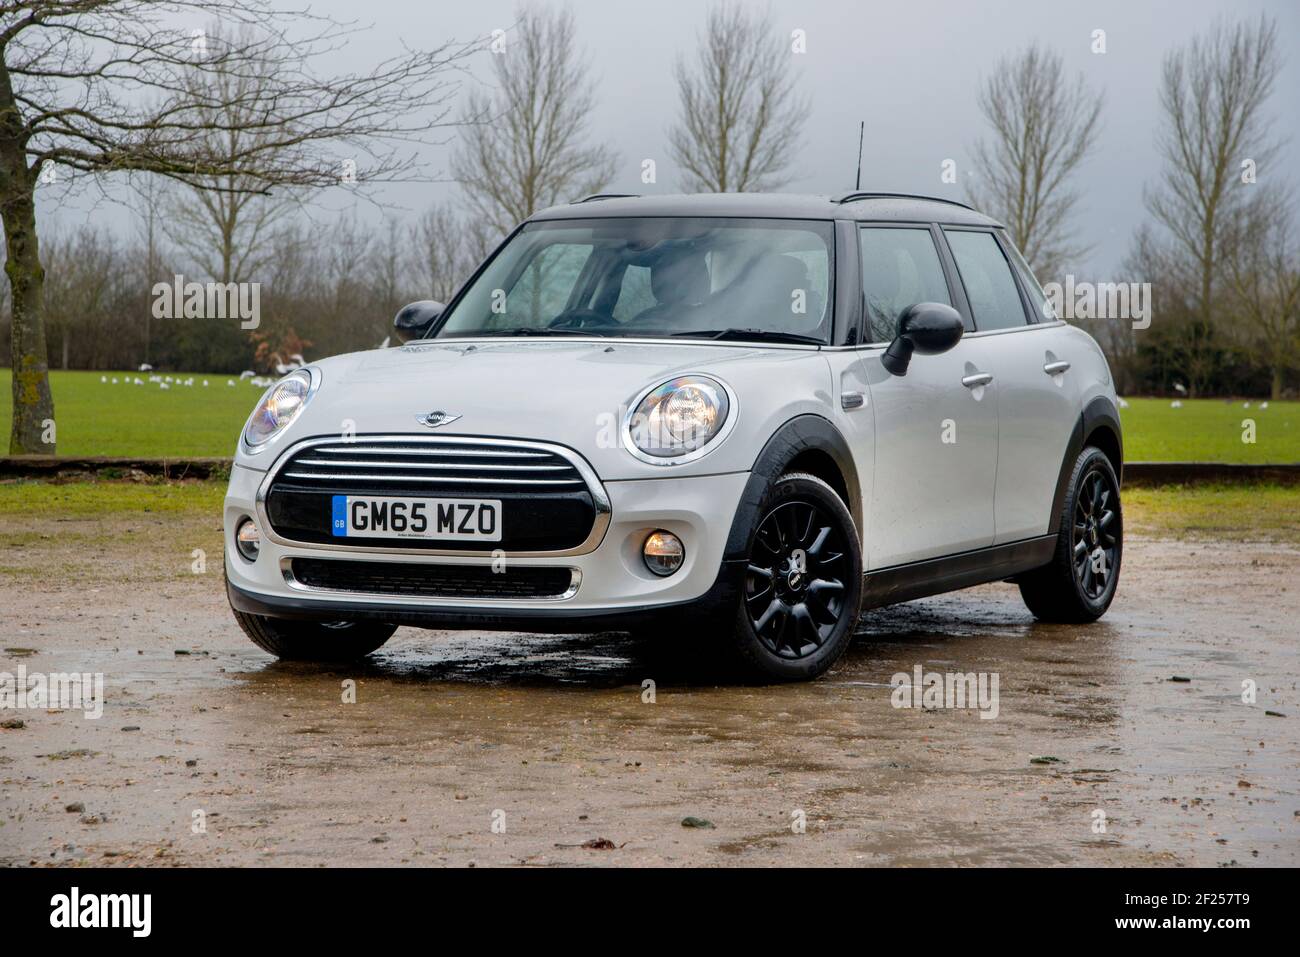 MINI Cooper S 5-Door - Your Funky HD Wallpapers Are Served